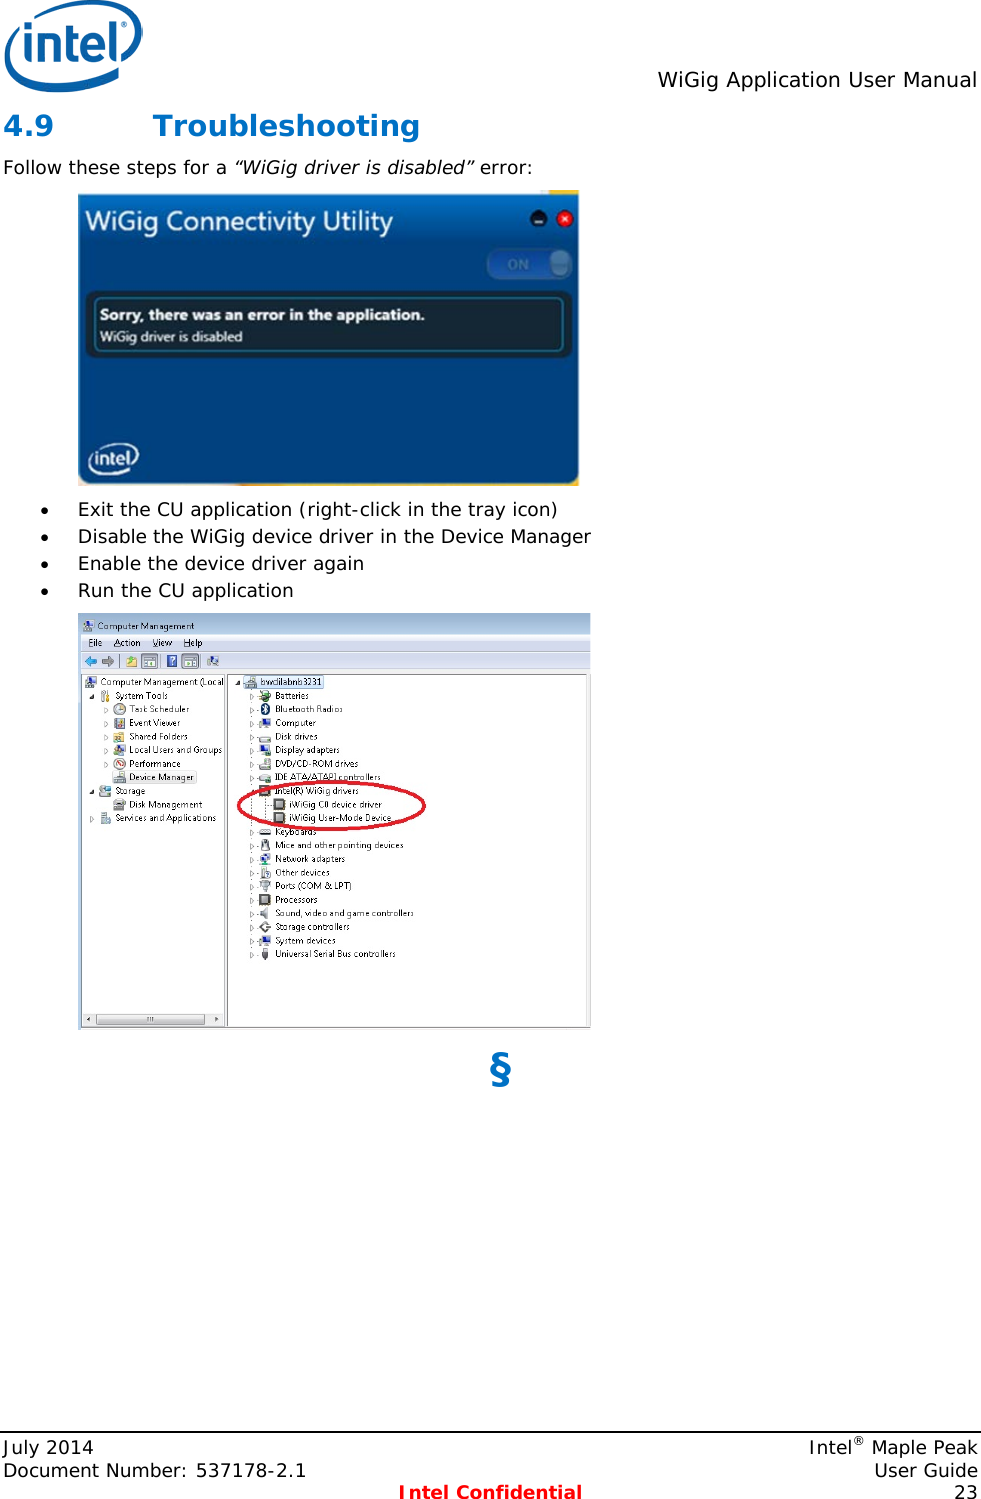  WiGig Application User Manual  4.9 Troubleshooting Follow these steps for a “WiGig driver is disabled” error:  • Exit the CU application (right-click in the tray icon) • Disable the WiGig device driver in the Device Manager  • Enable the device driver again • Run the CU application  §  July 2014    Intel® Maple Peak Document Number: 537178-2.1    User Guide  Intel Confidential 23 